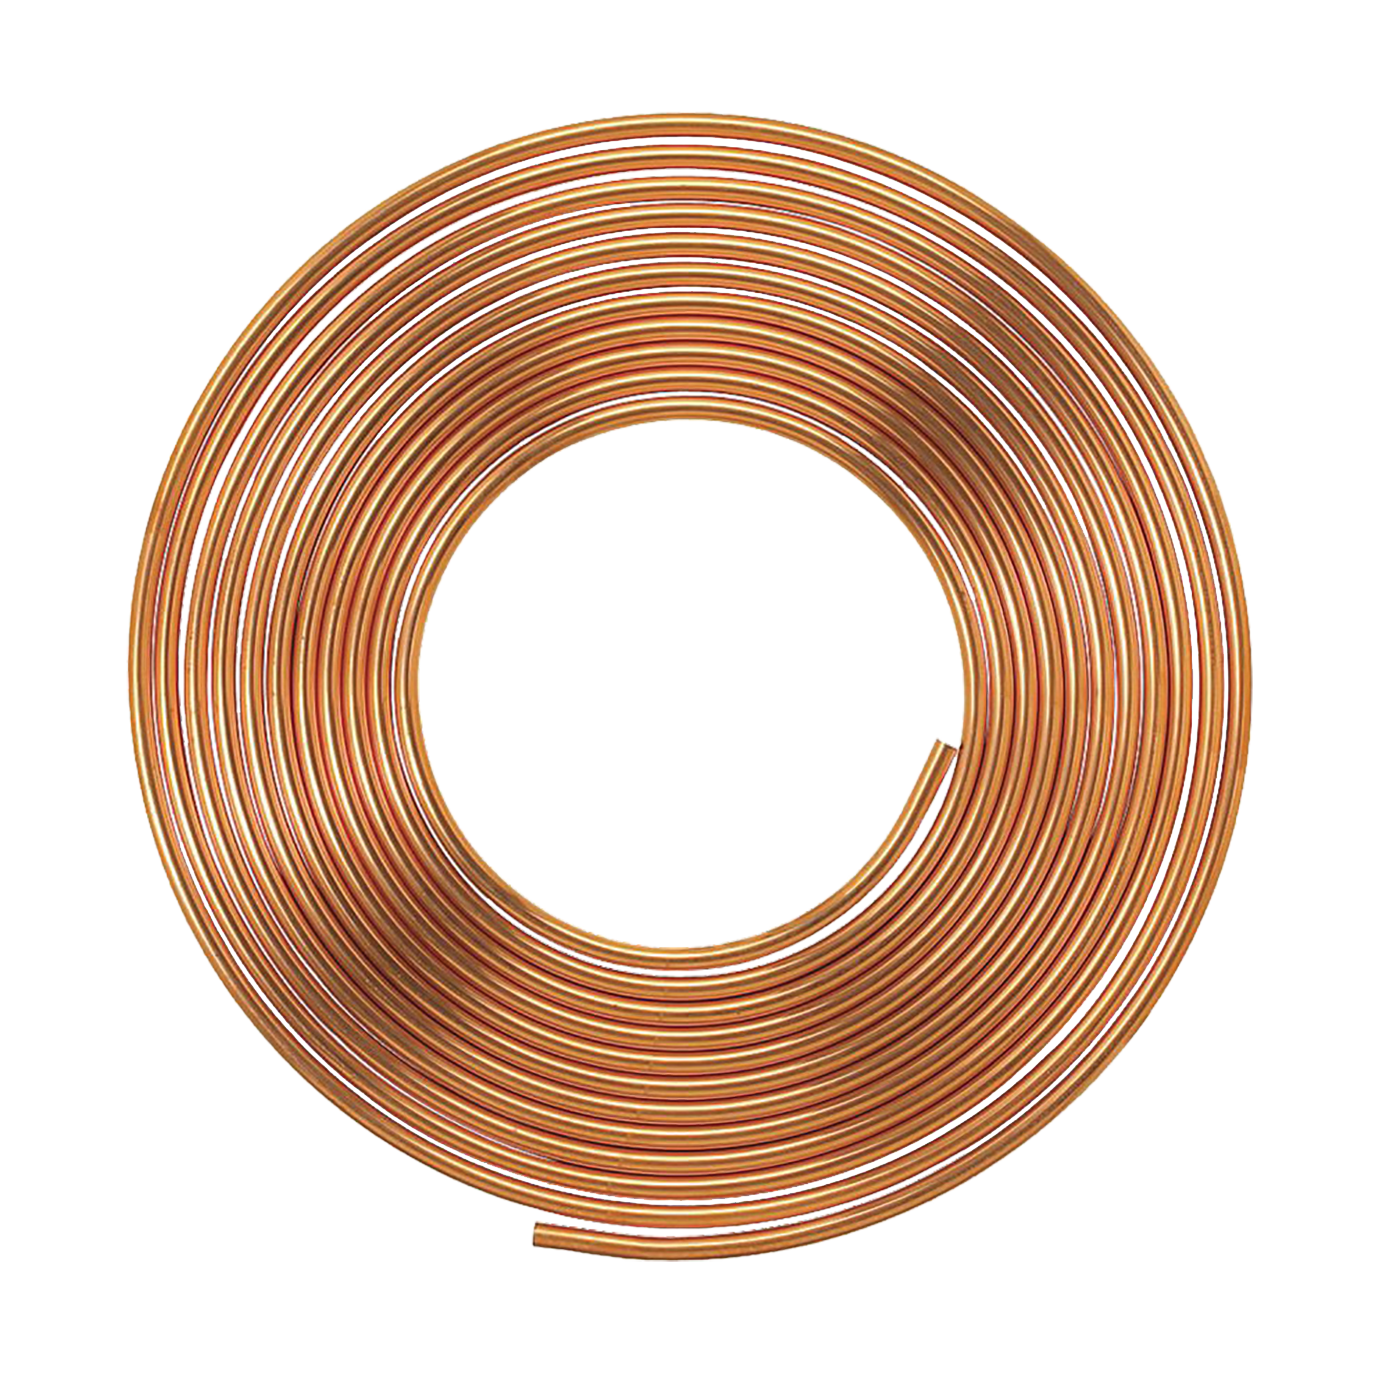 COPPER TUBING 7/8 X 50 FT ROLL - Copper Tubing and Fittings